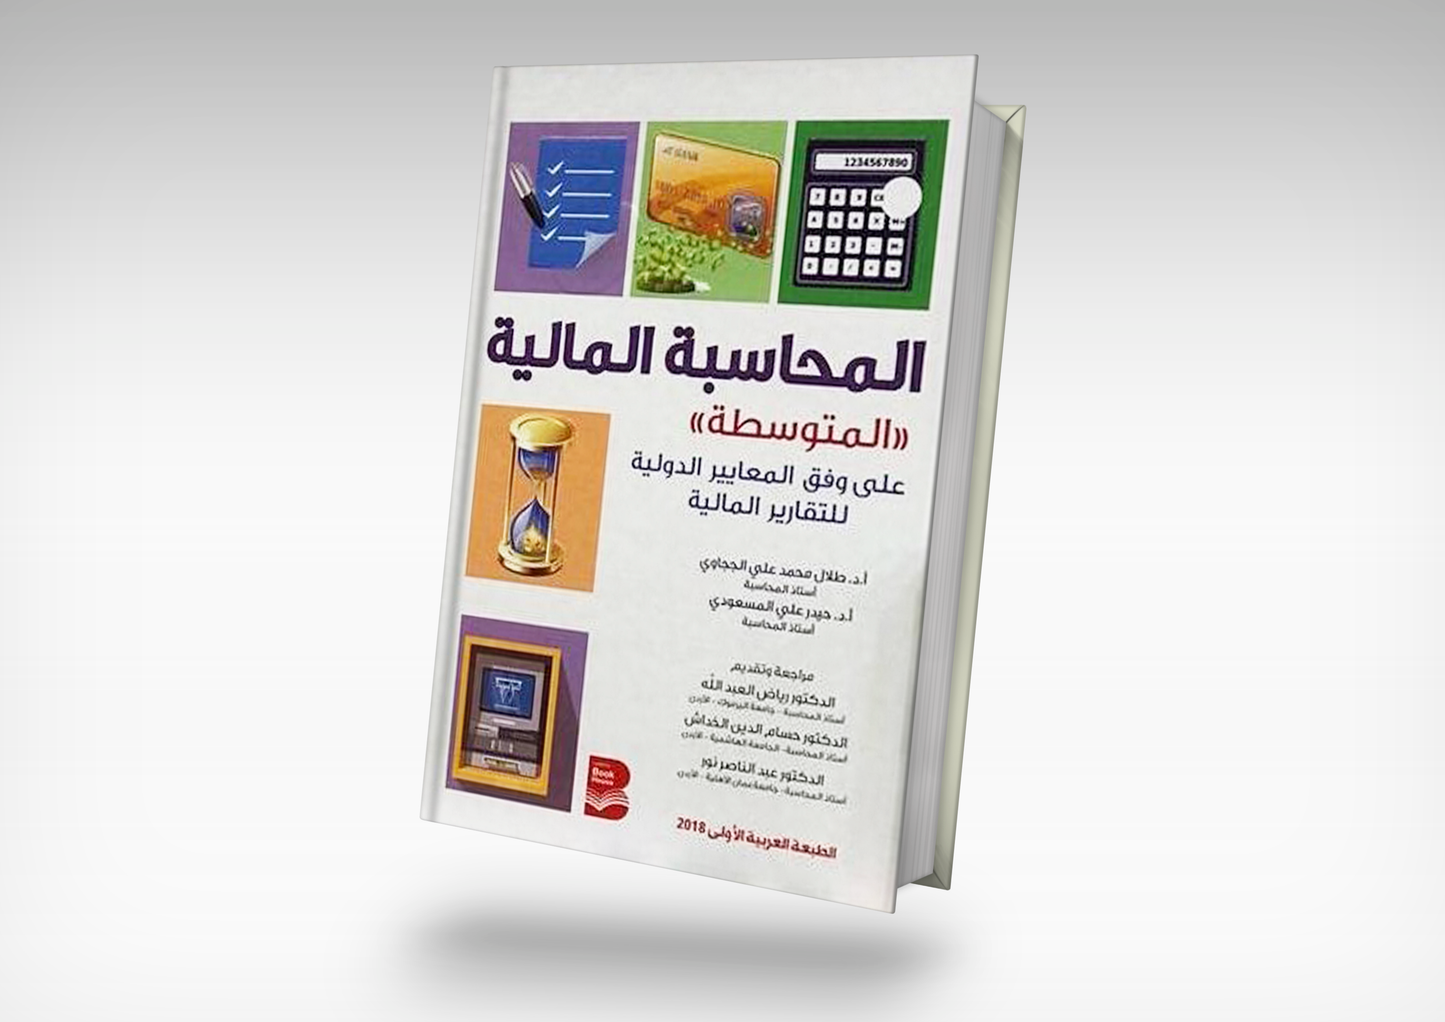 Intermediate financial accounting book according to international standards for financial reporting